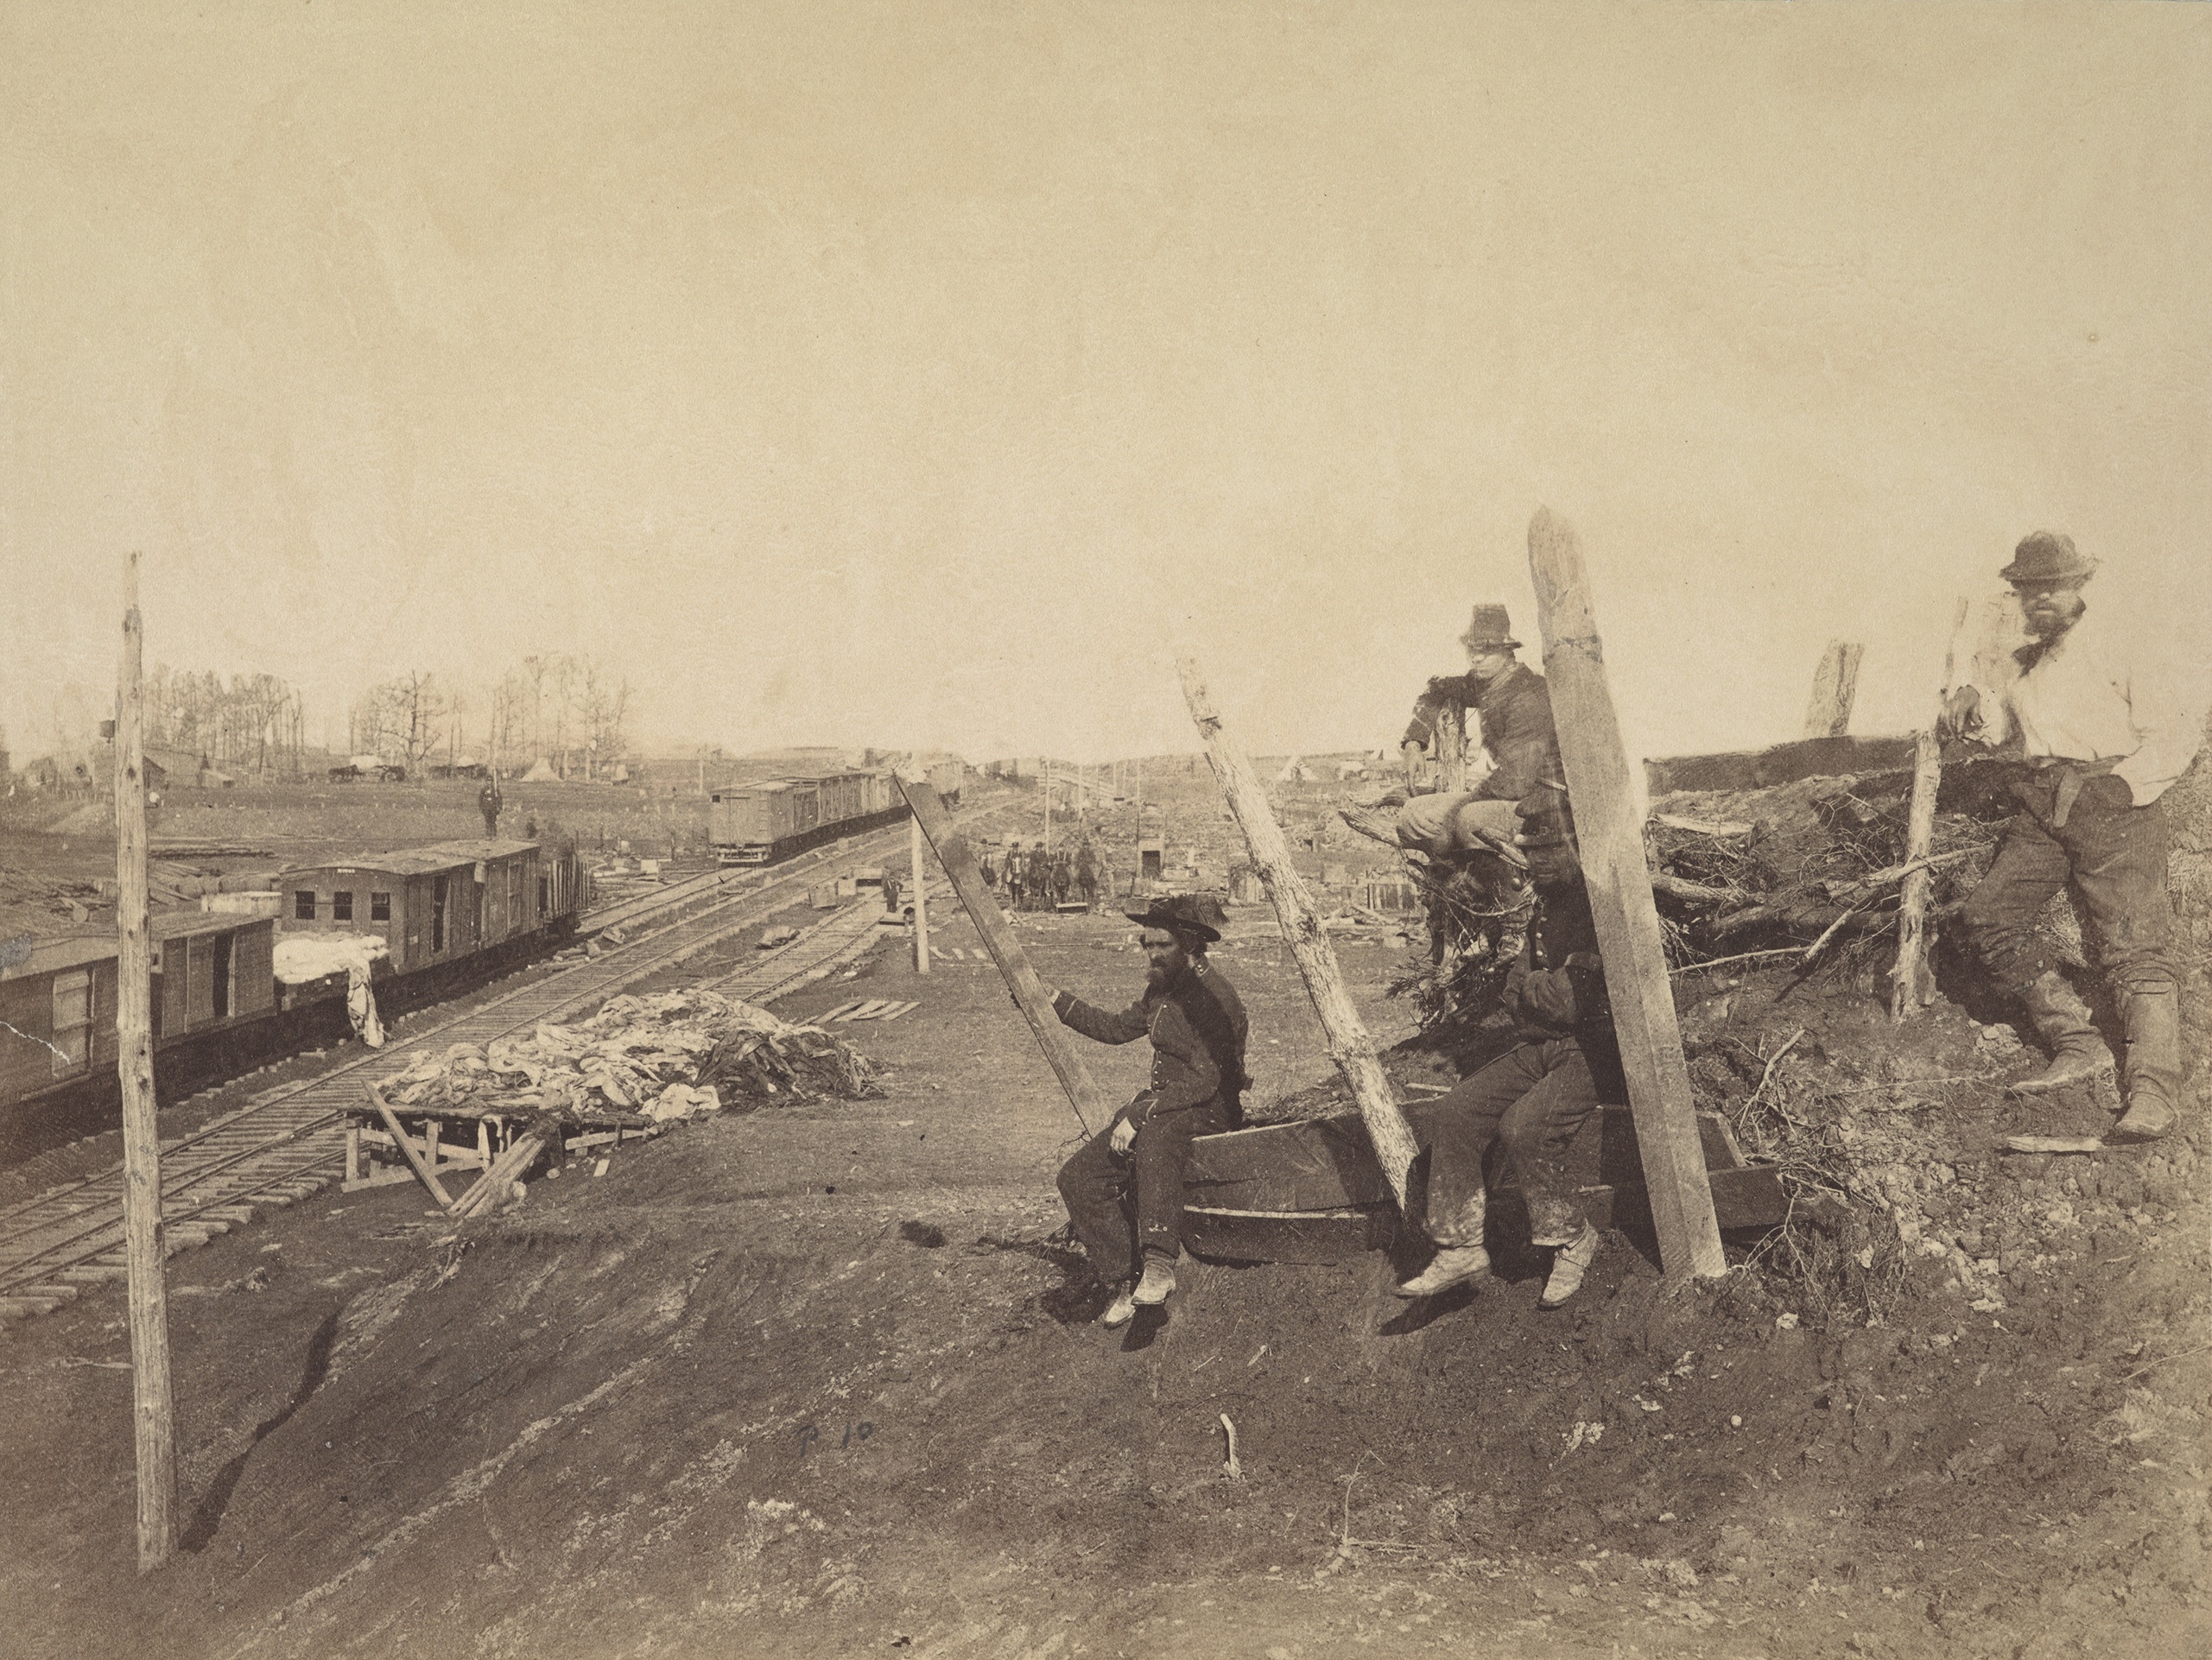 Wartime Manassas Junction, Va.: When Confederate soldiers captured this critical Union supply depot on the Orange & Alexandria Railroad in August 1862, toothbrushes reportedly were â€œprized booty.â€ (Library of Congress)